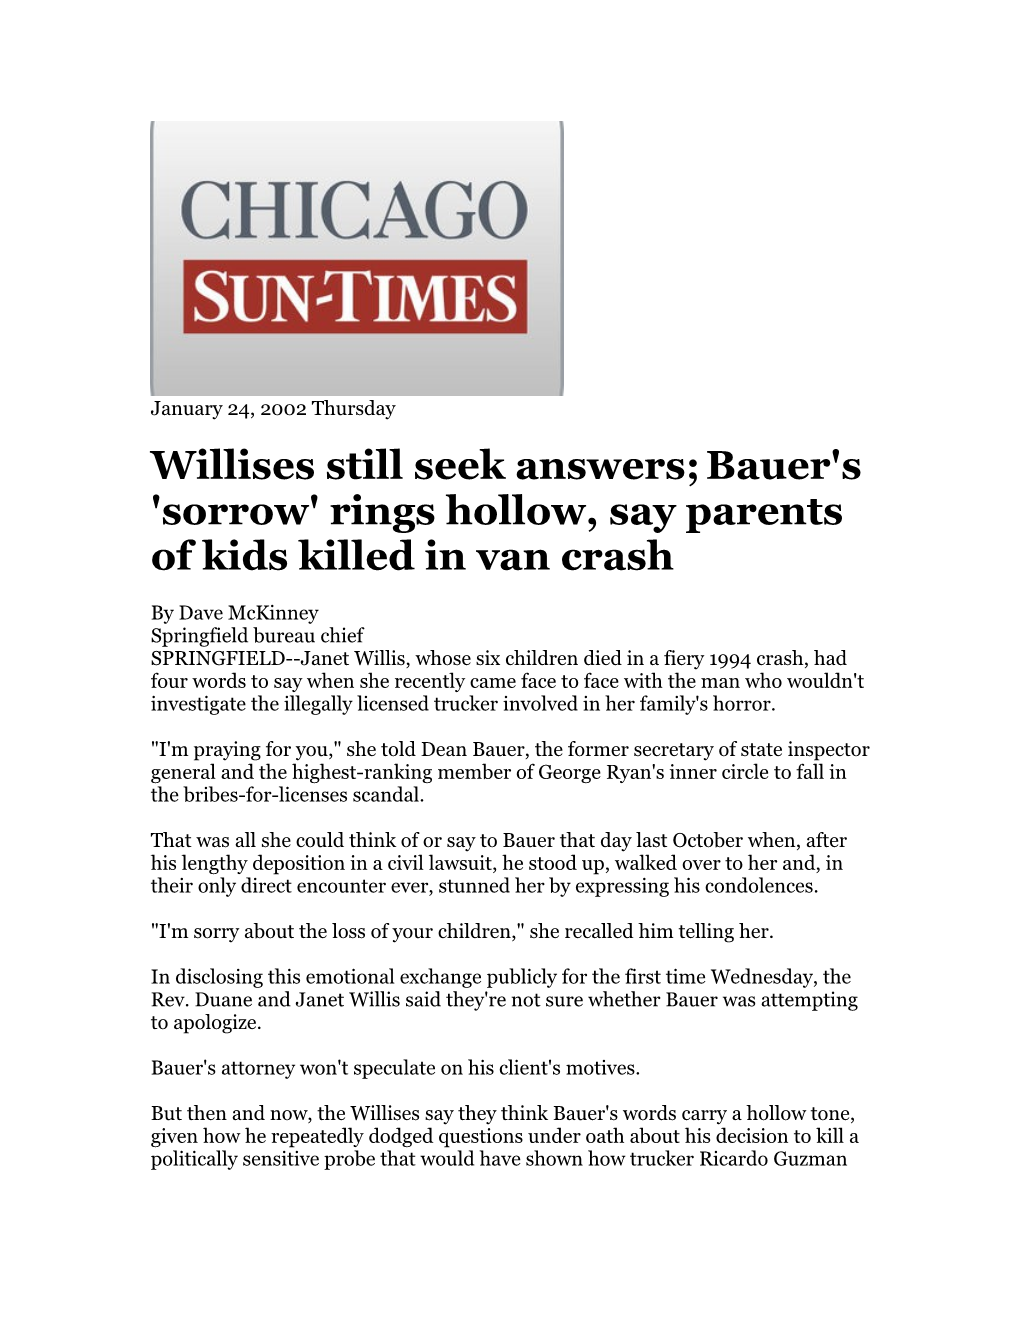 Willises Still Seek Answers; Bauer's 'Sorrow' Rings Hollow, Say Parents of Kids Killed